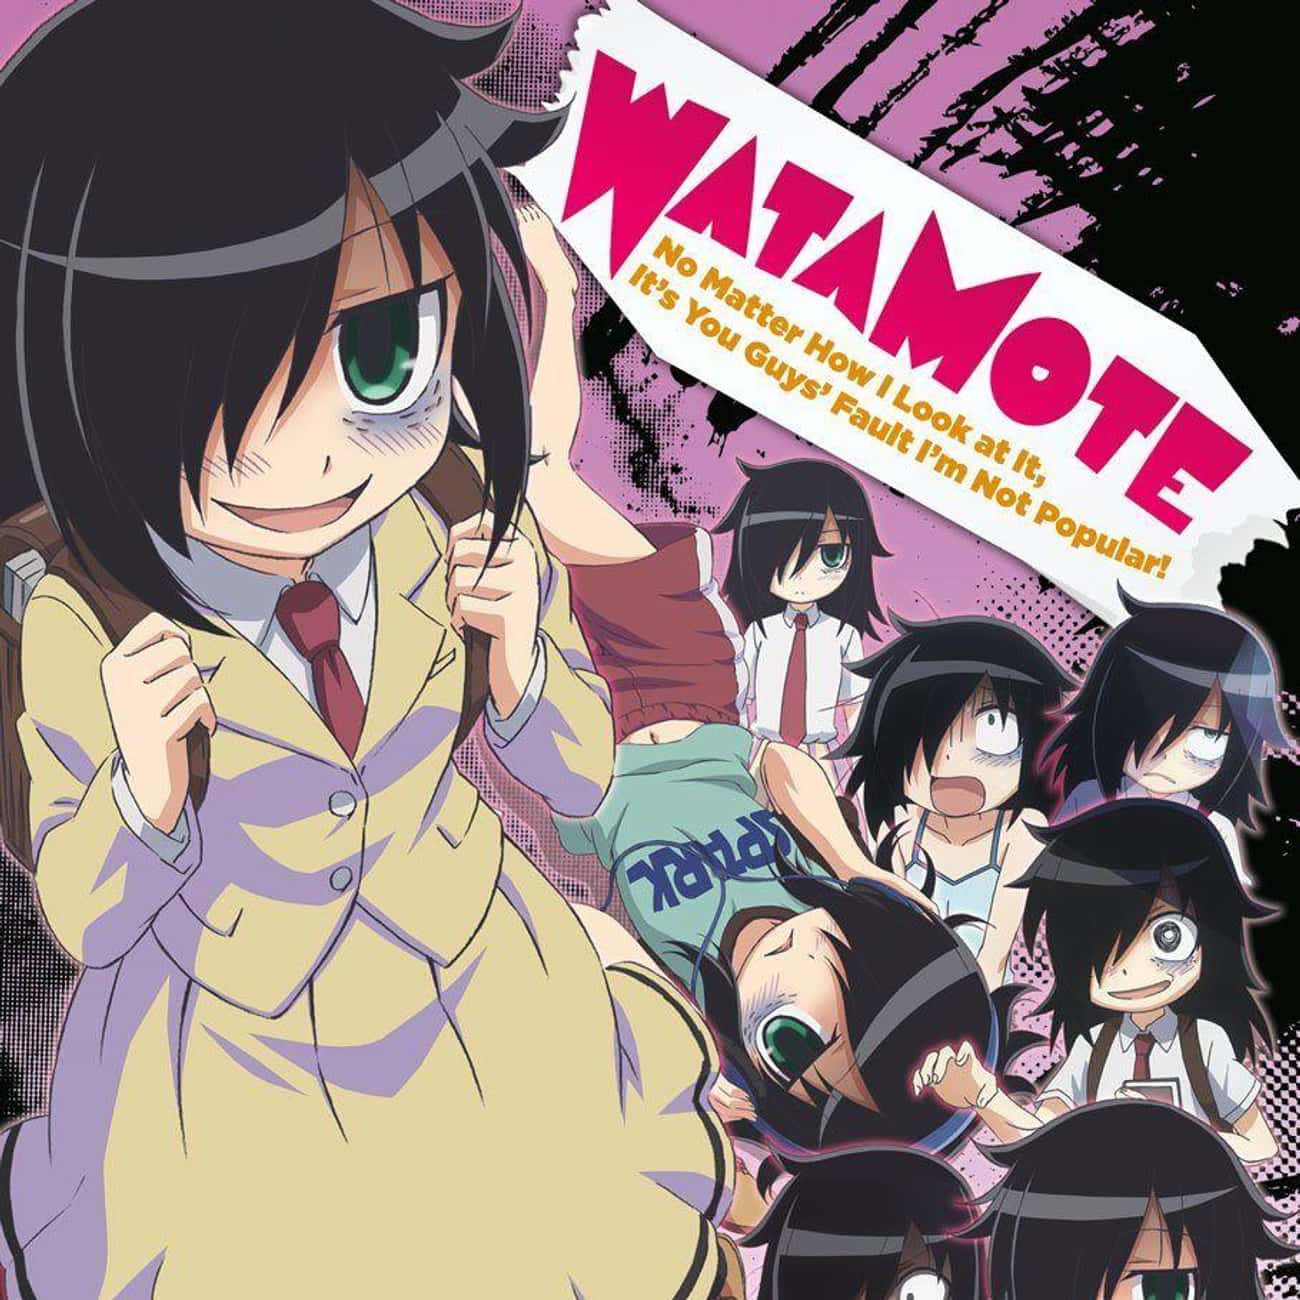 Watamote: No Matter How I Look at It, It's You Guys Fault I'm Not Popular!